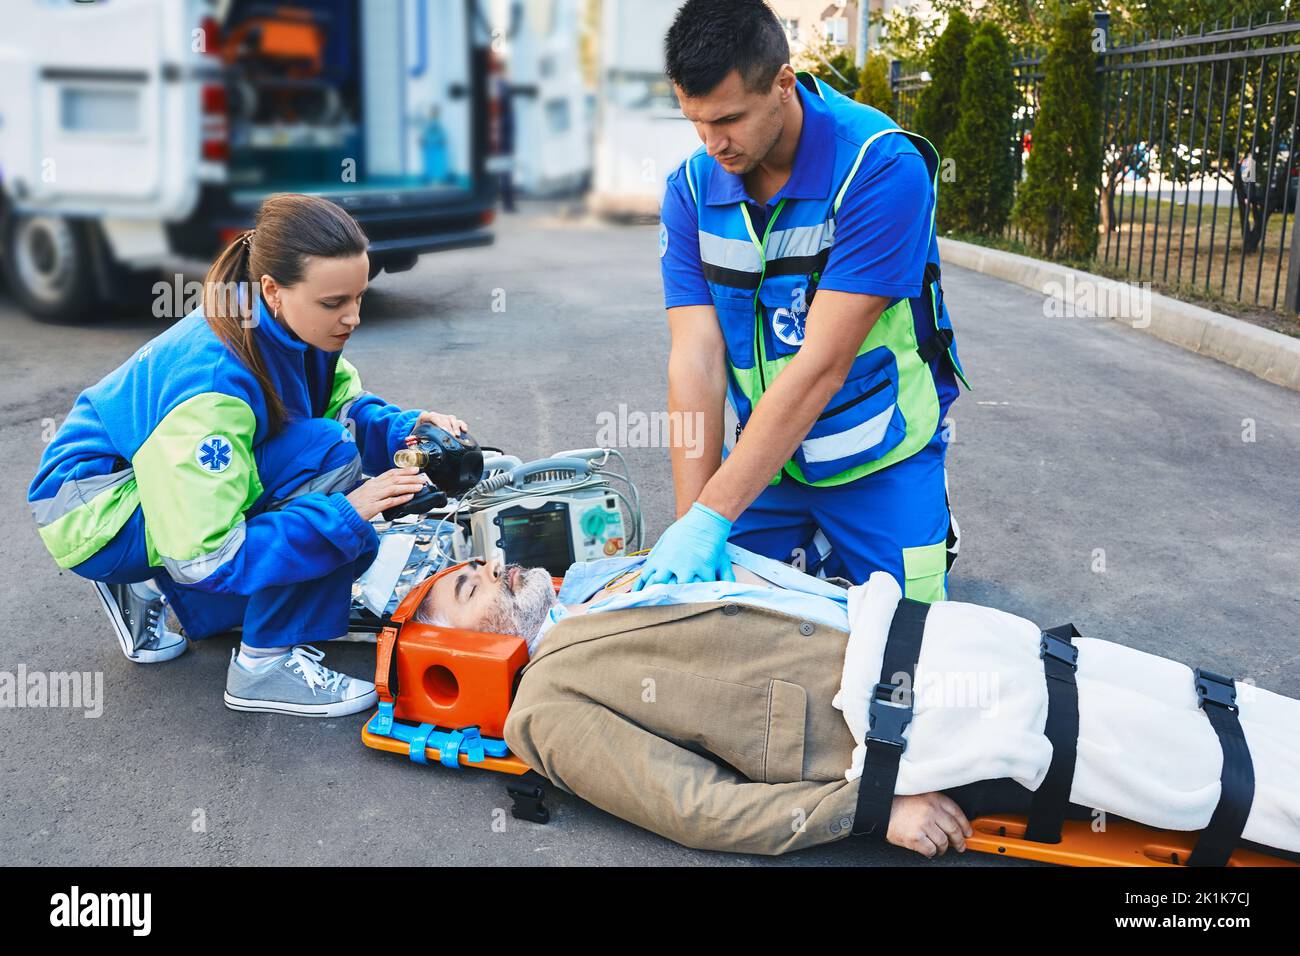 EMS paramedics performing closed-chest cardiac massage and artificial respiration for injured mature man who lies unconscious on medical stretcher nea Stock Photo